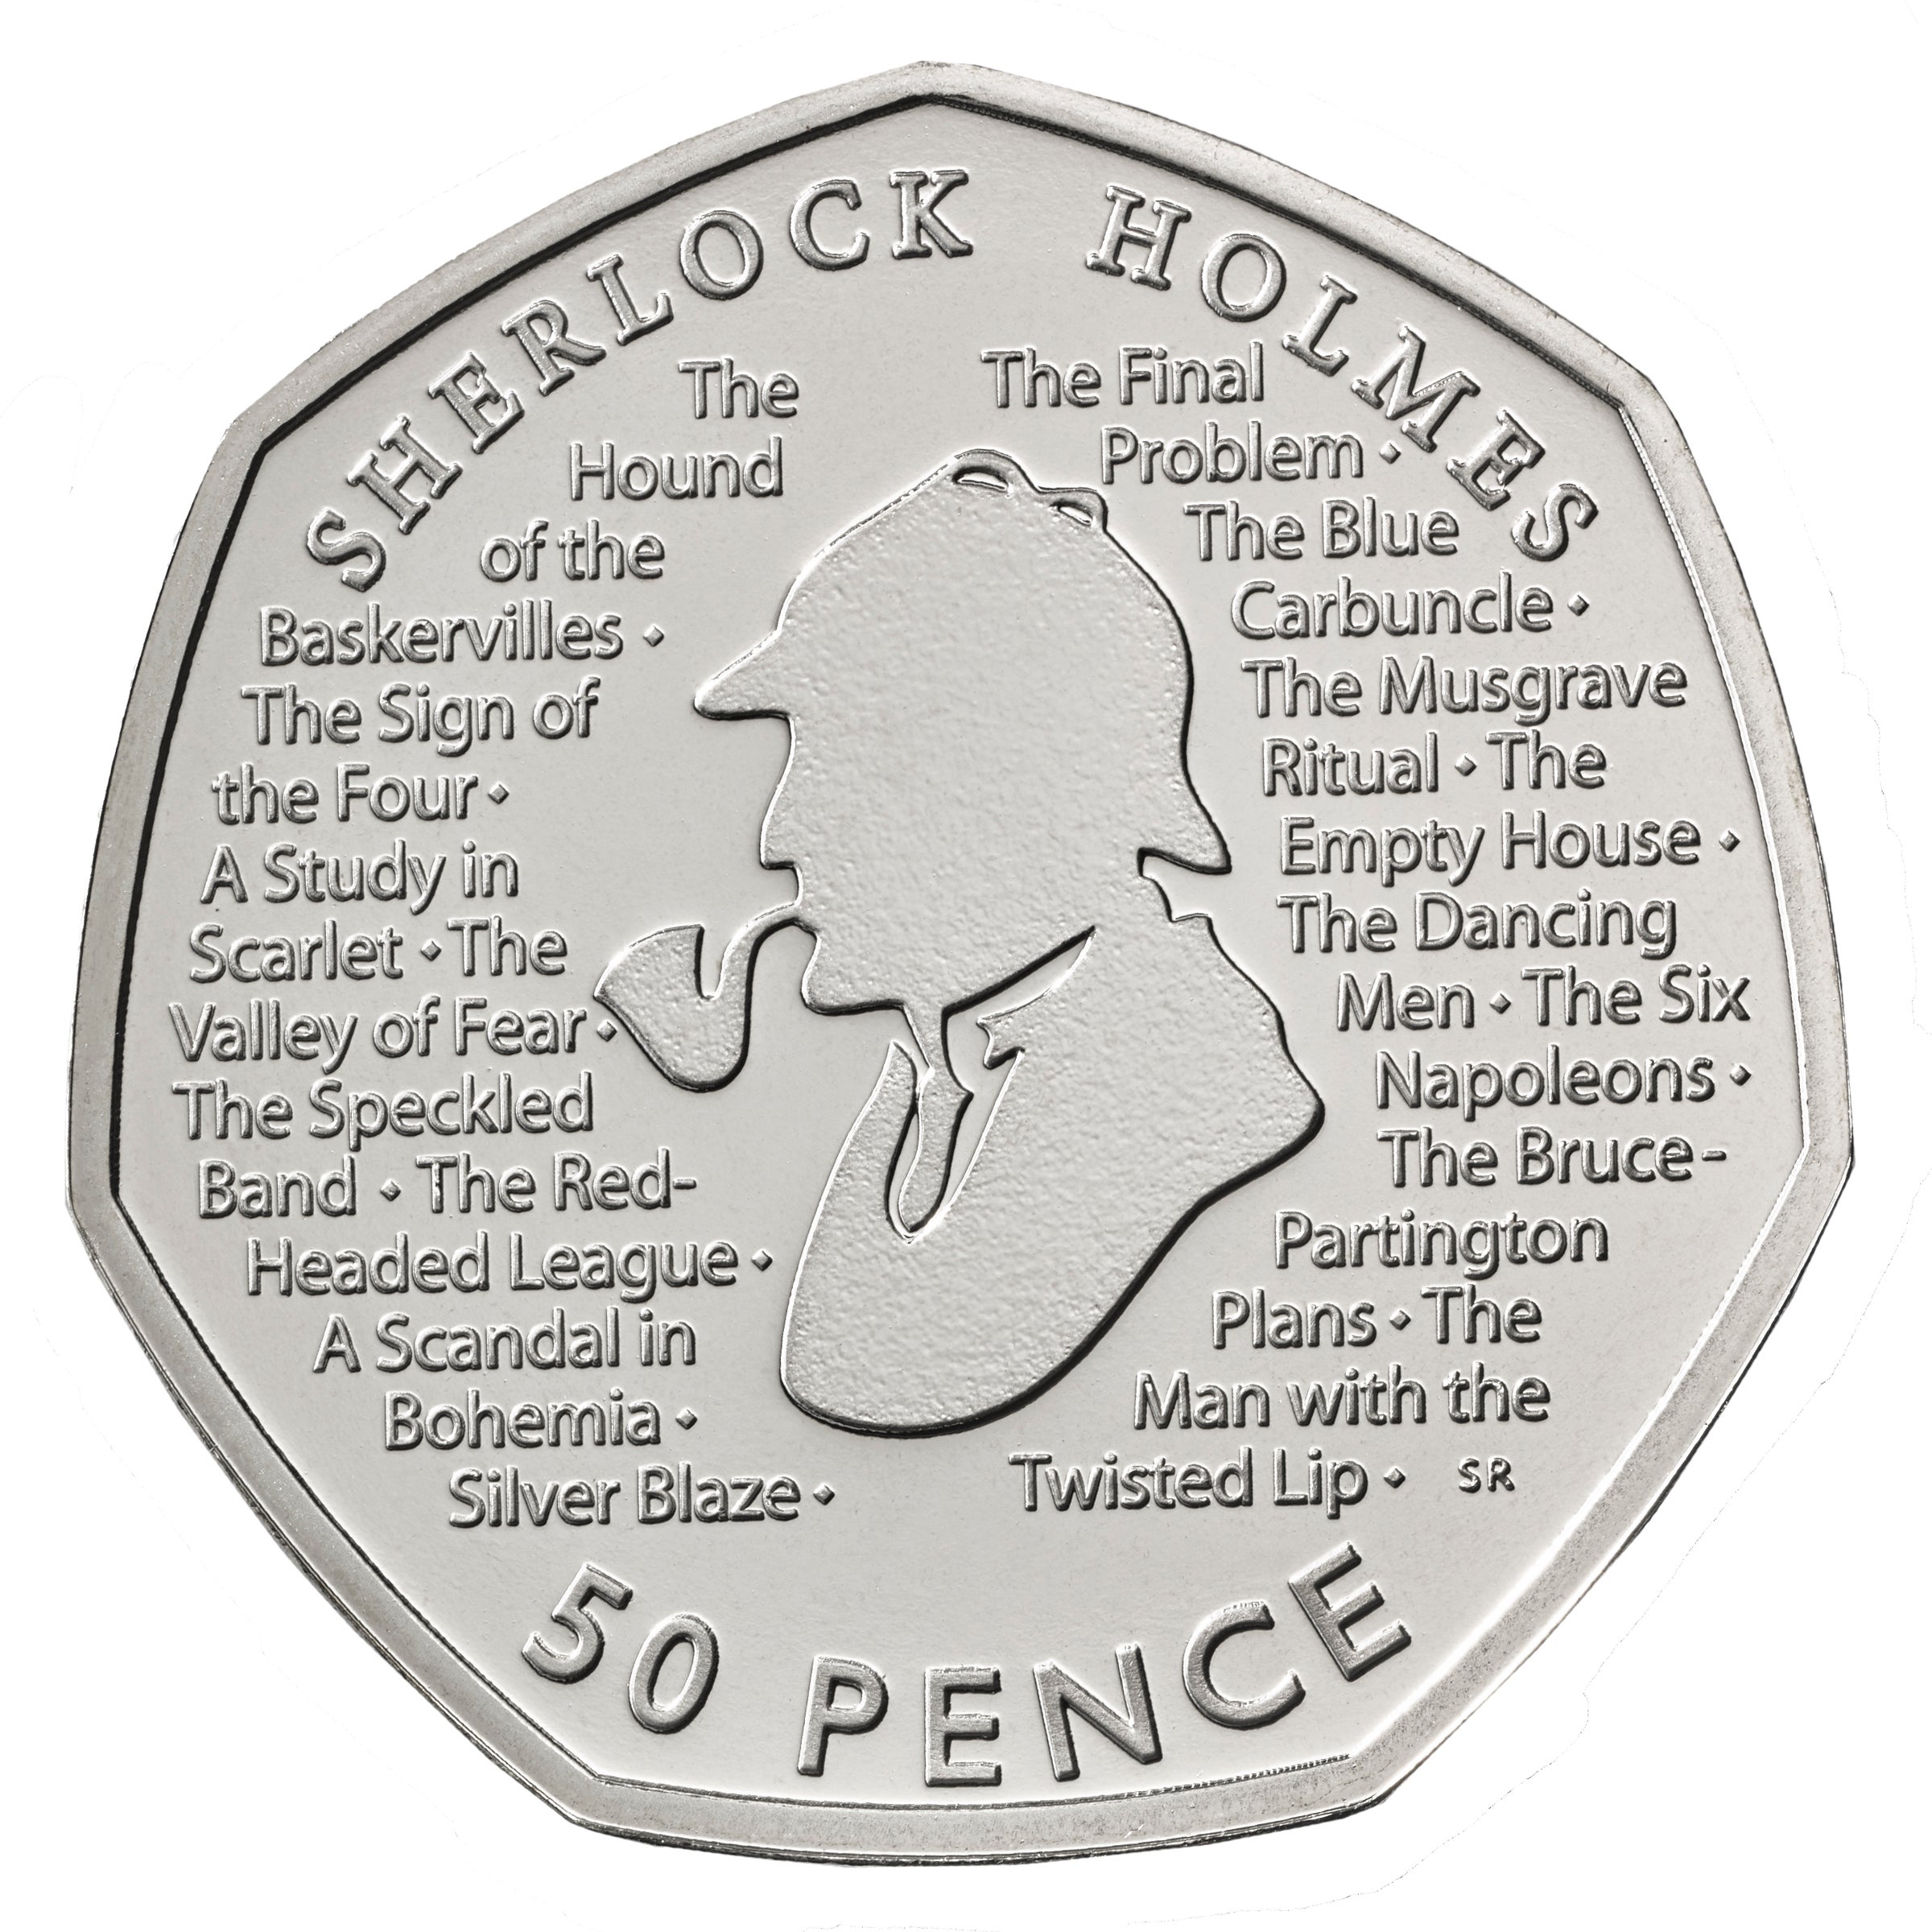 New Sherlock Holmes 50p coin requires magnifying glass to read text